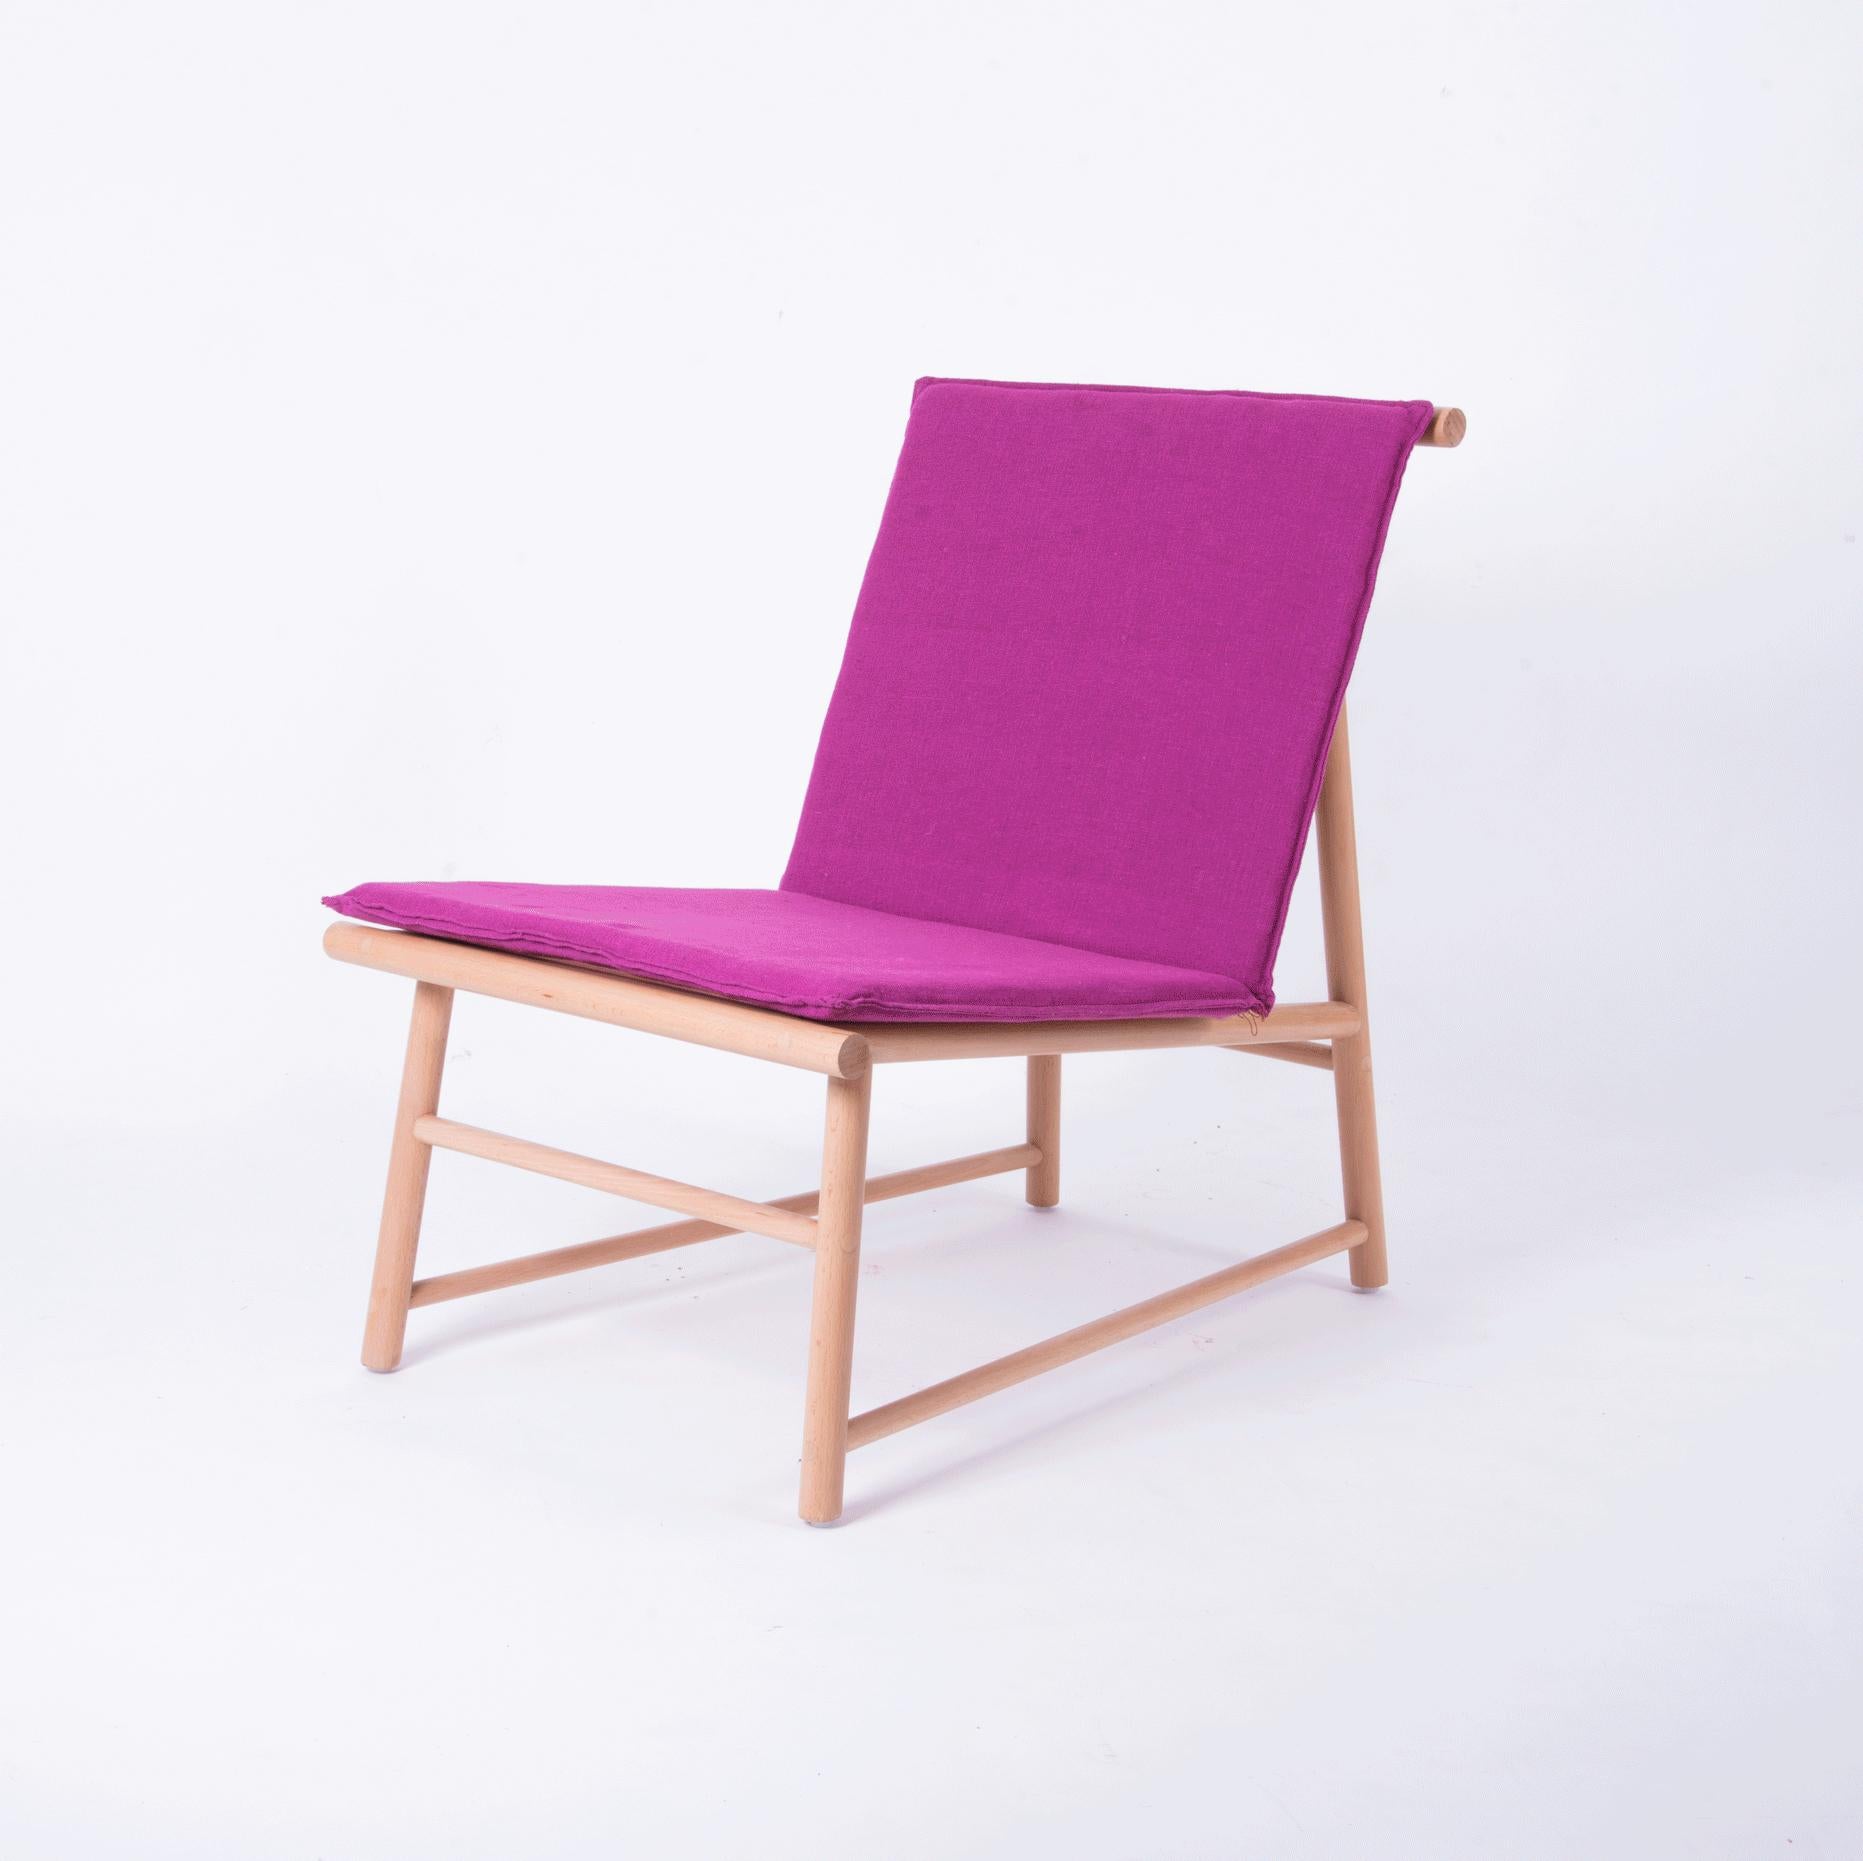 Hand-Crafted Easy Chair, Lounge Chair in Beech Wood with Fabric Seat For Sale